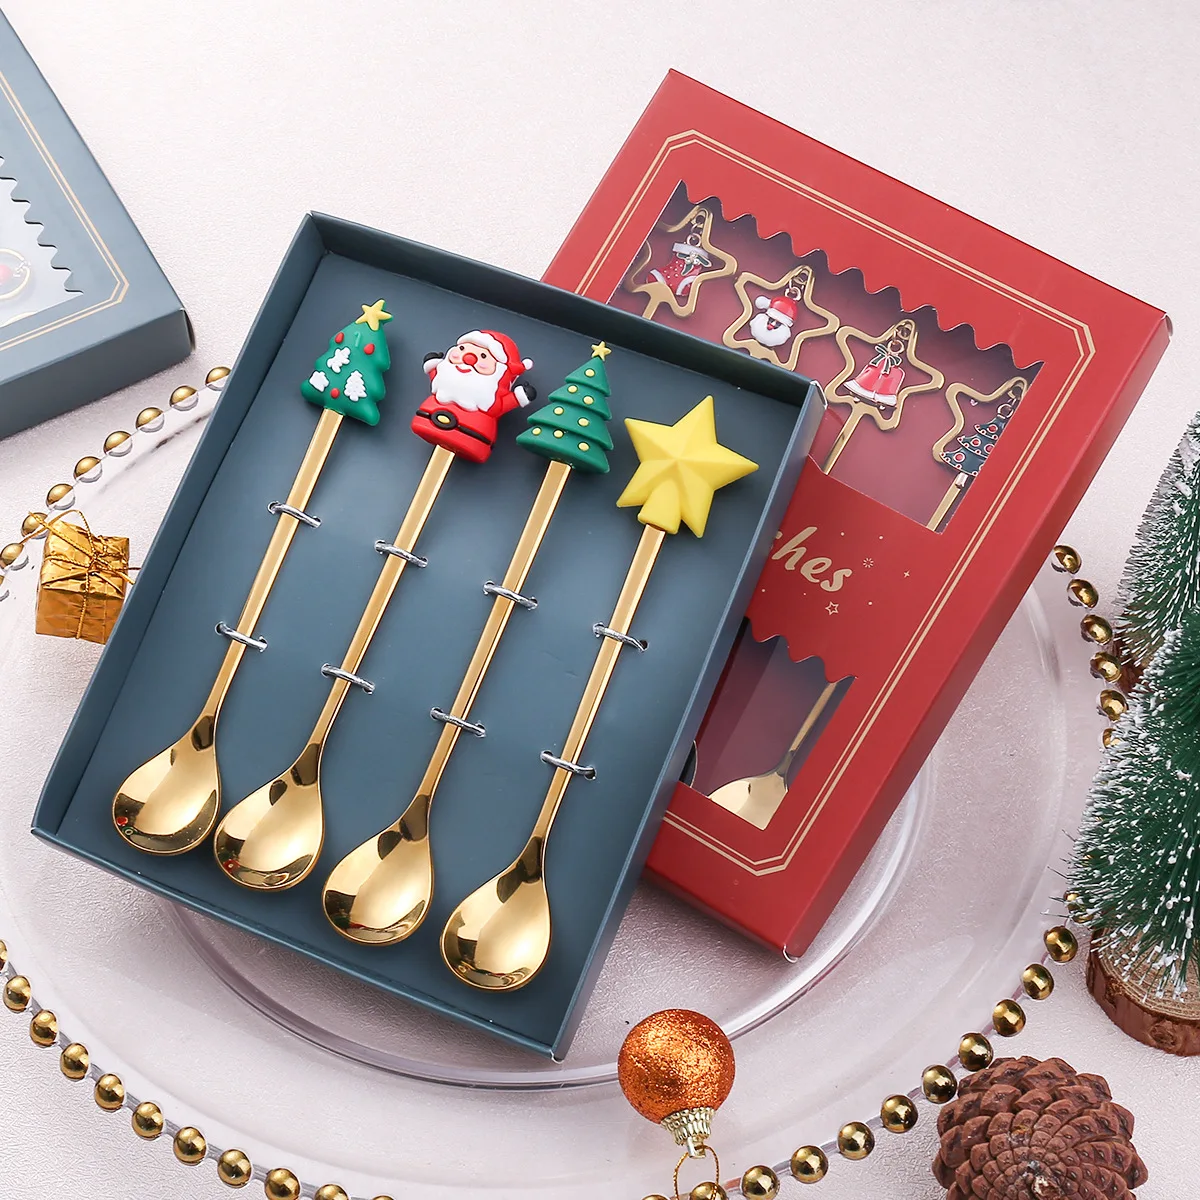 4 Green Christmas PVC Doll 410 and 304 Stainless Steel Spoon Tableware Set Dessert Coffee Spoon Fruit Fork Christmas Tree Gift